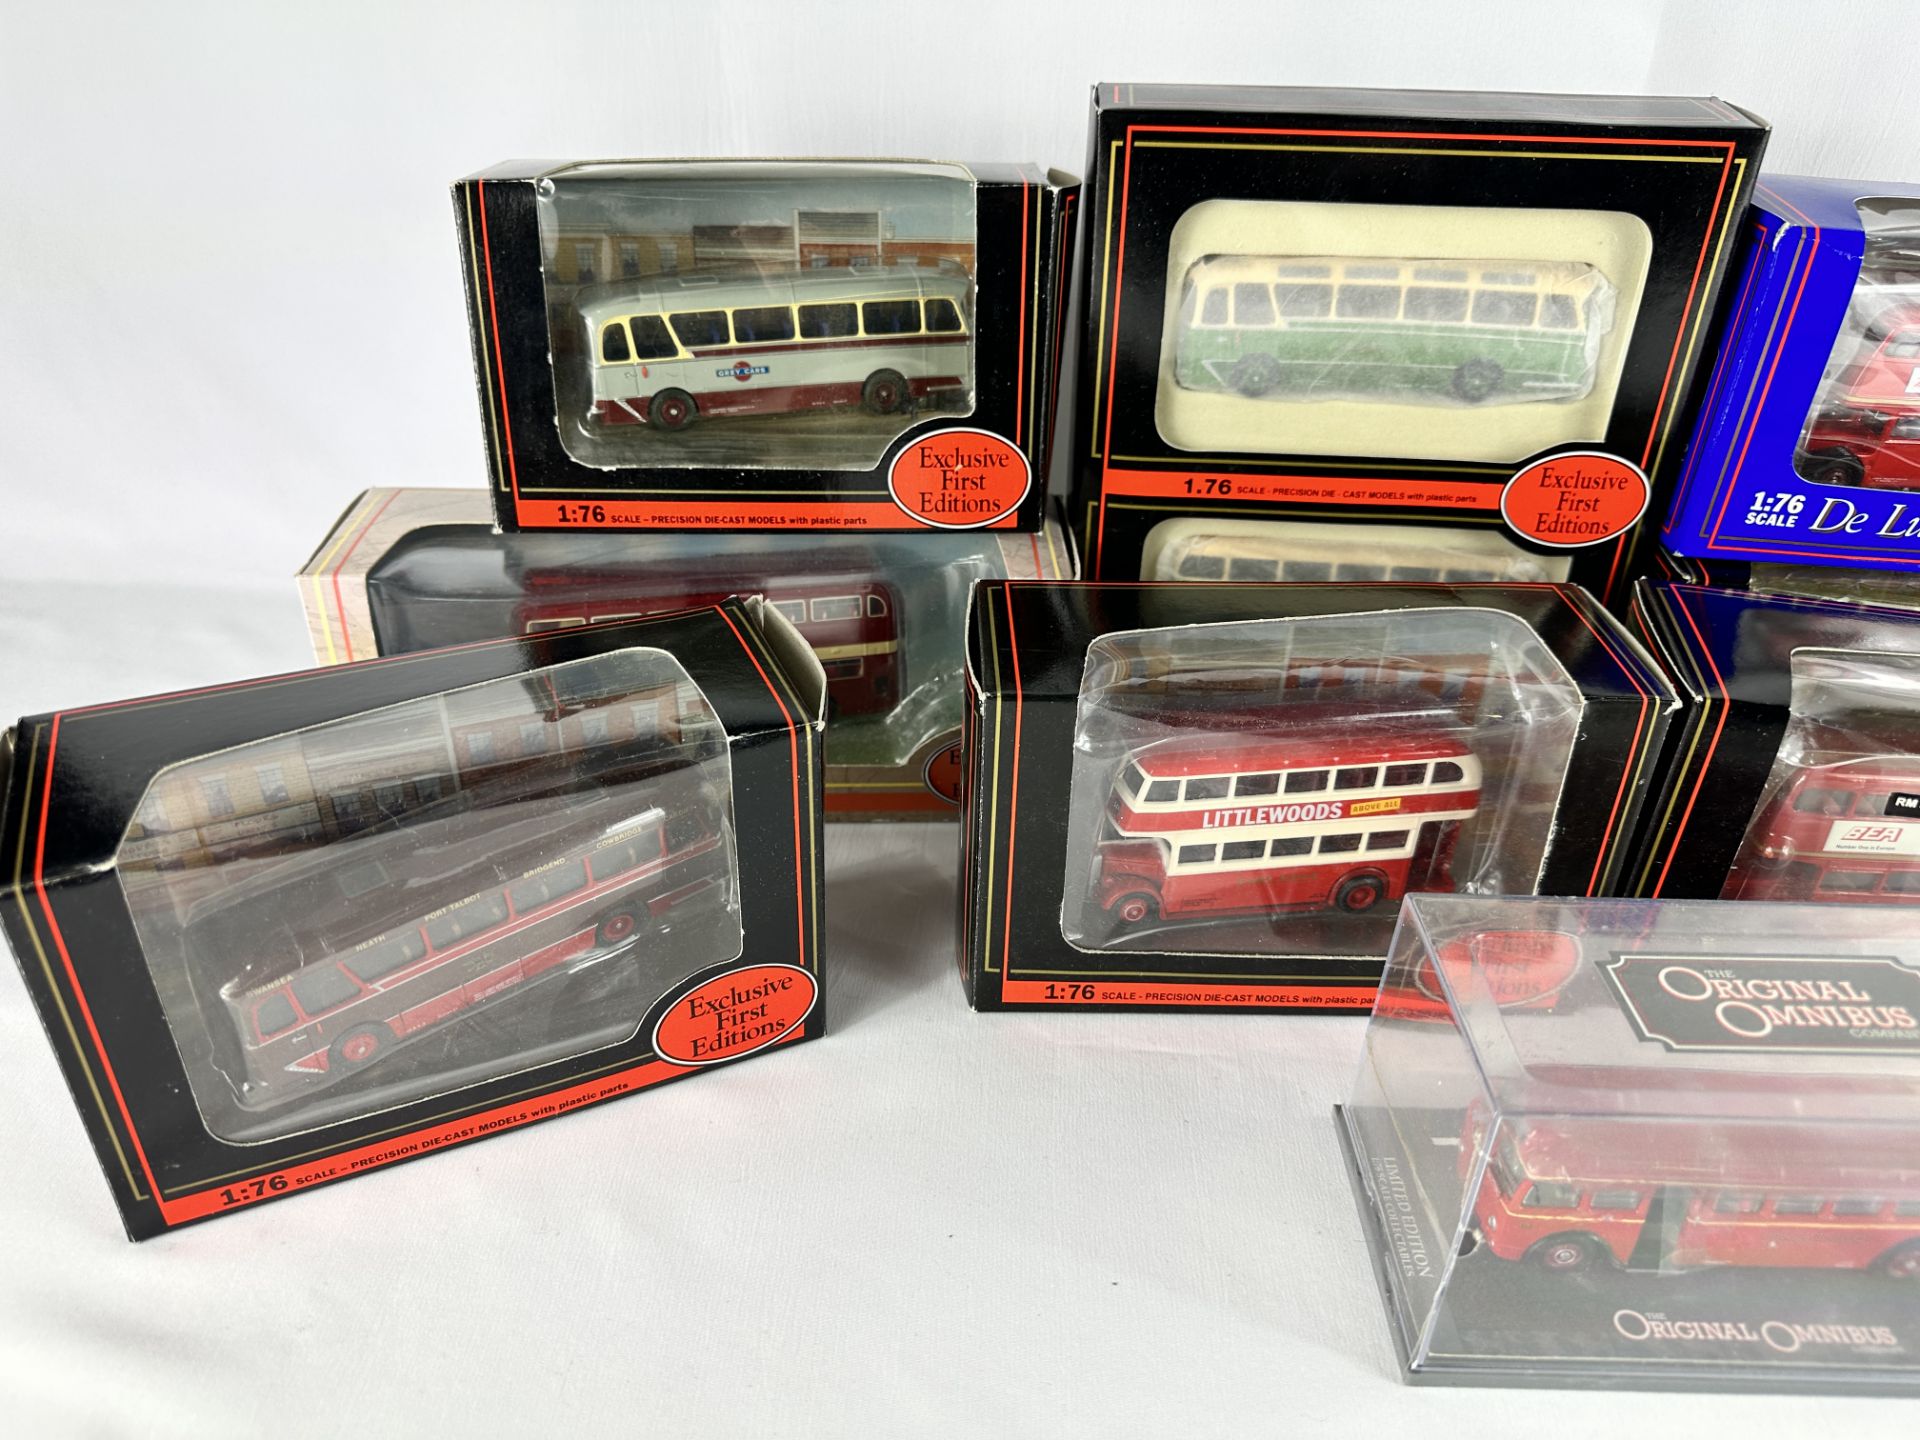 Ten Exclusive First Edition 1:76 diecast model buses in original boxes. - Image 2 of 3